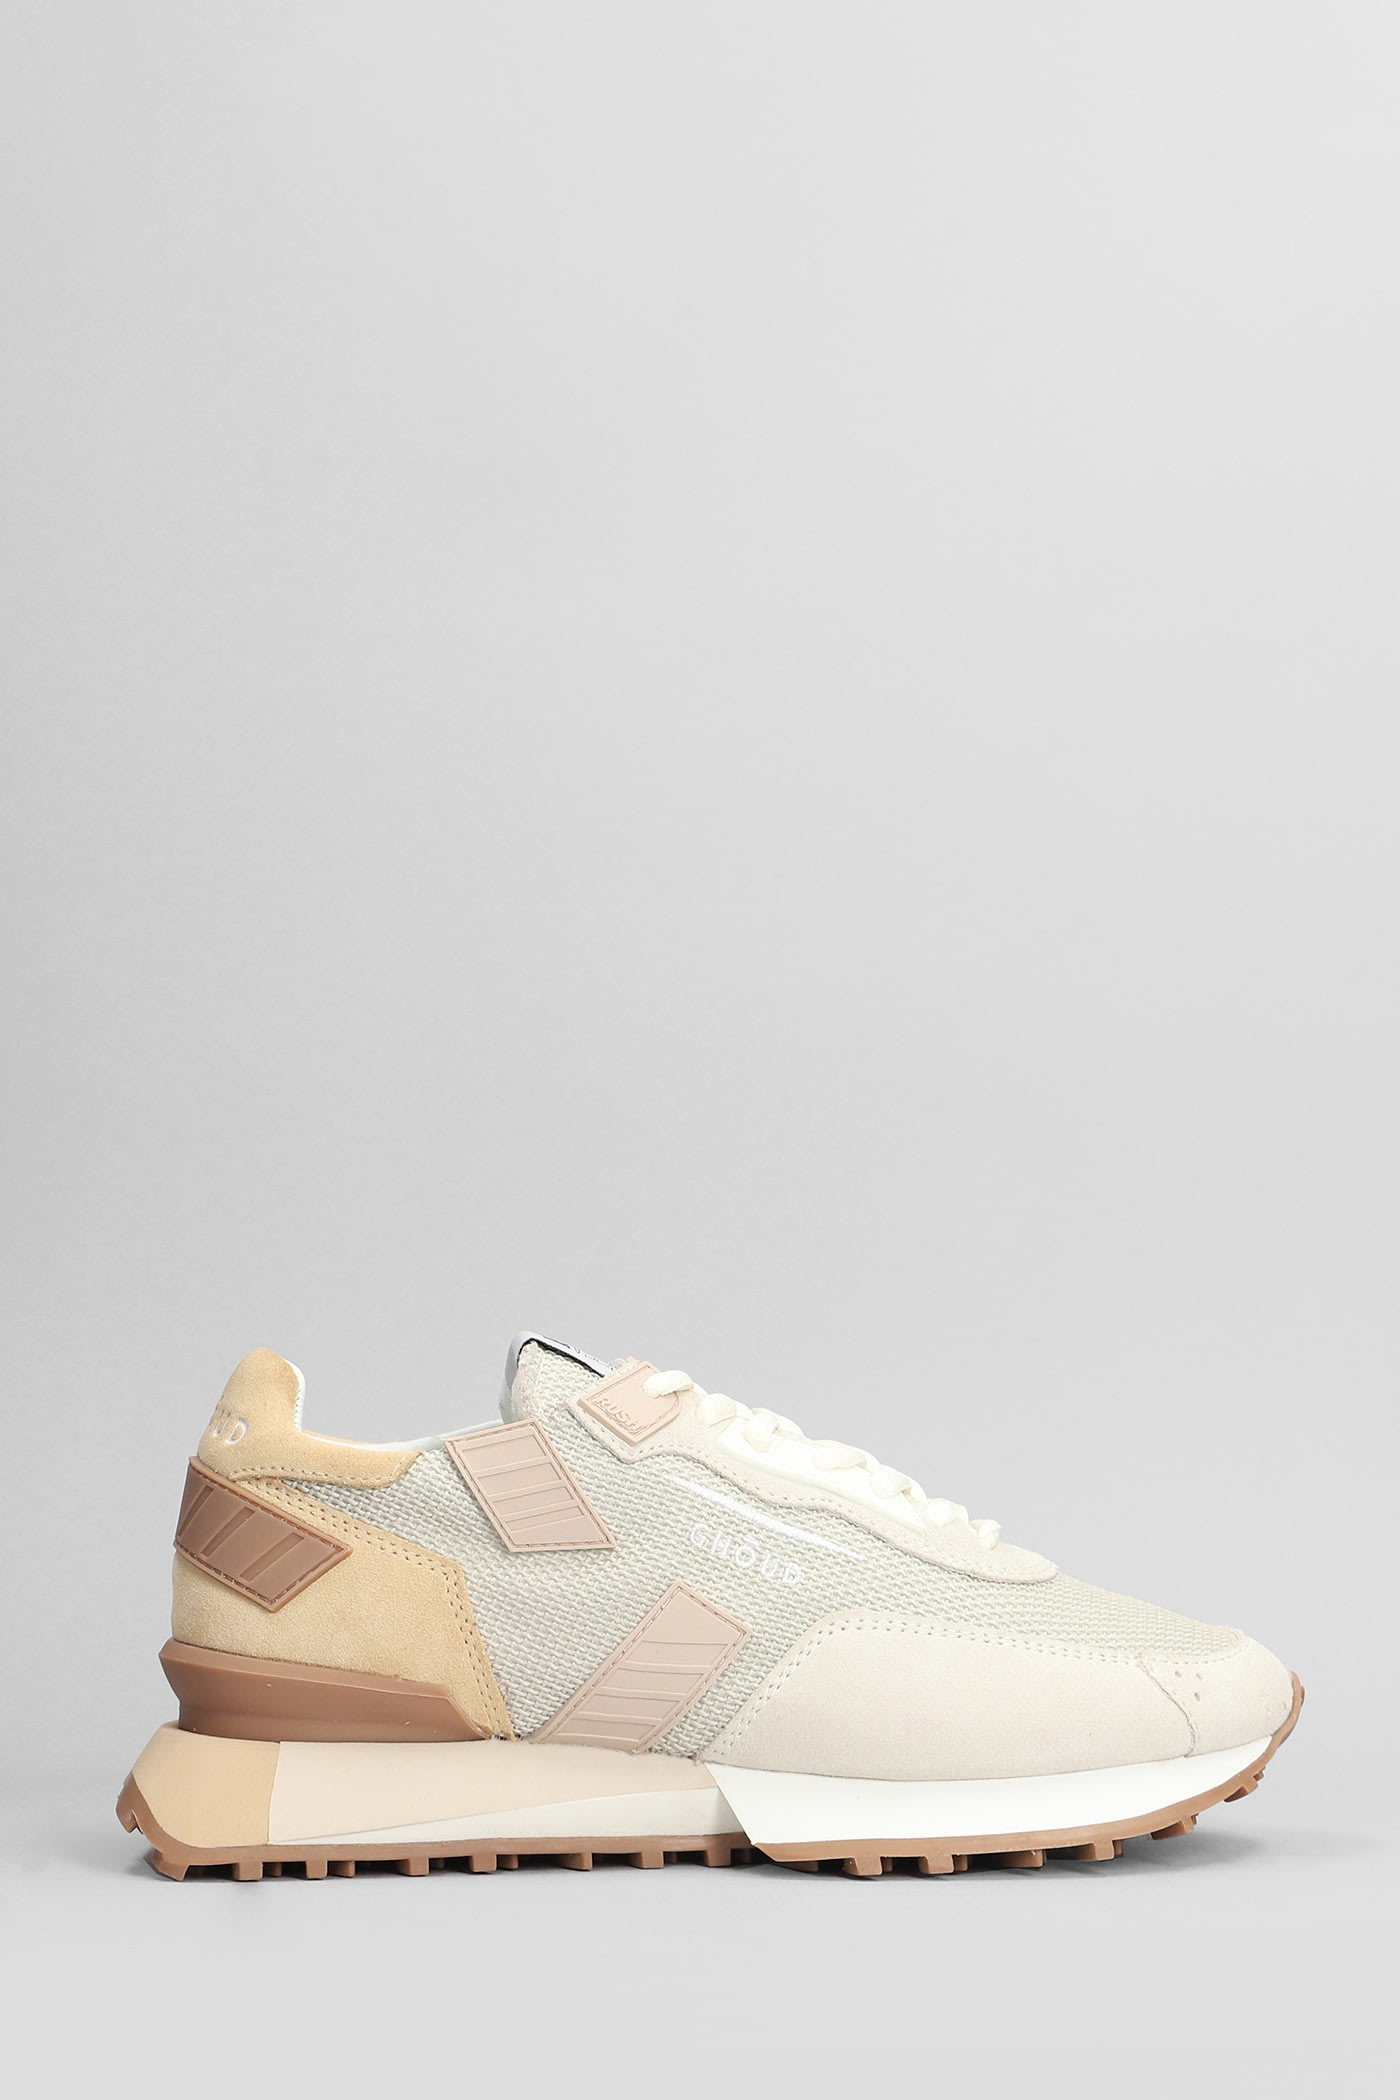 Rush Groove Sneakers In Beige Suede And Fabric